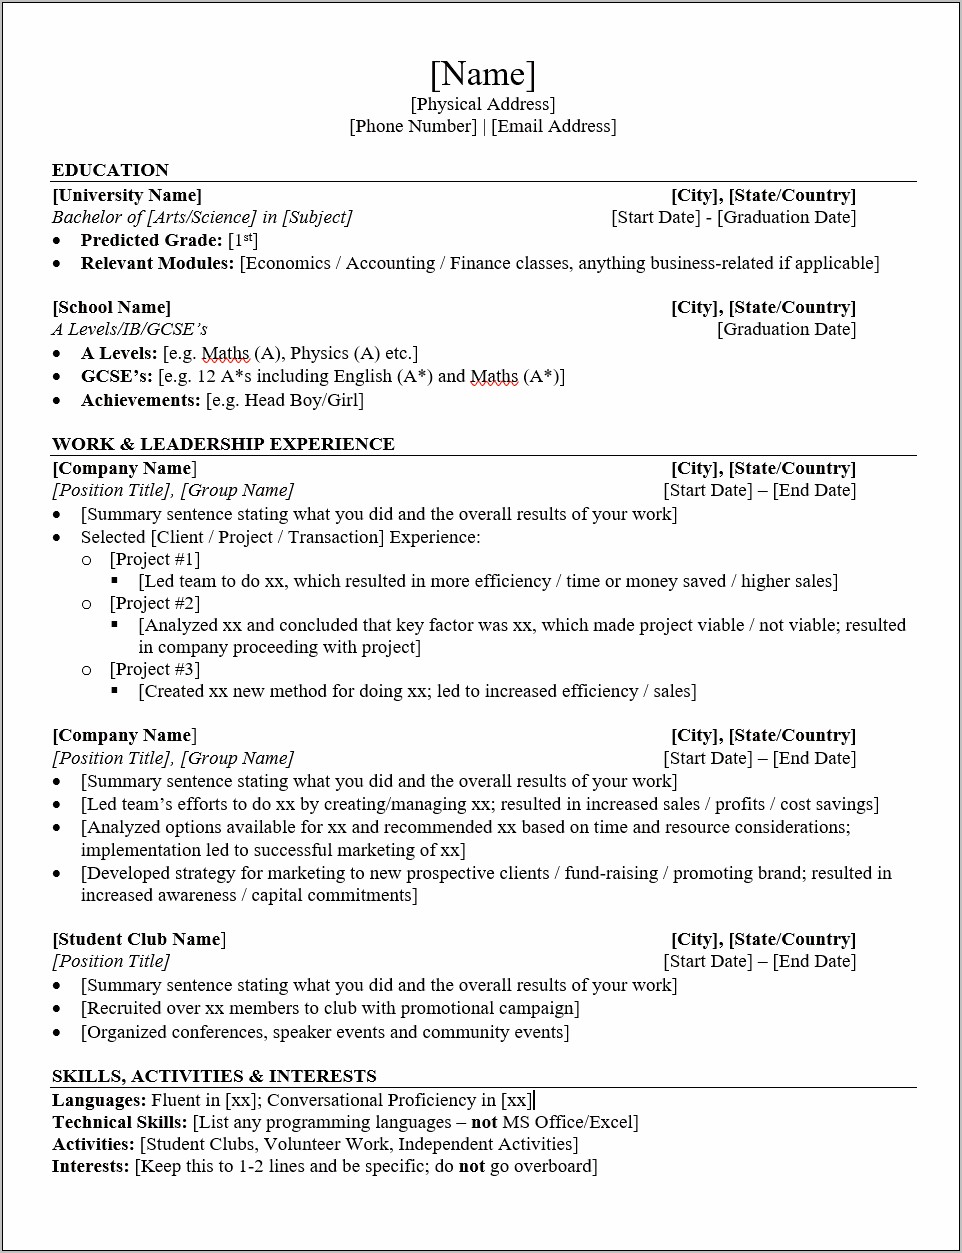 Structured Finance Investment Banking Resume Example